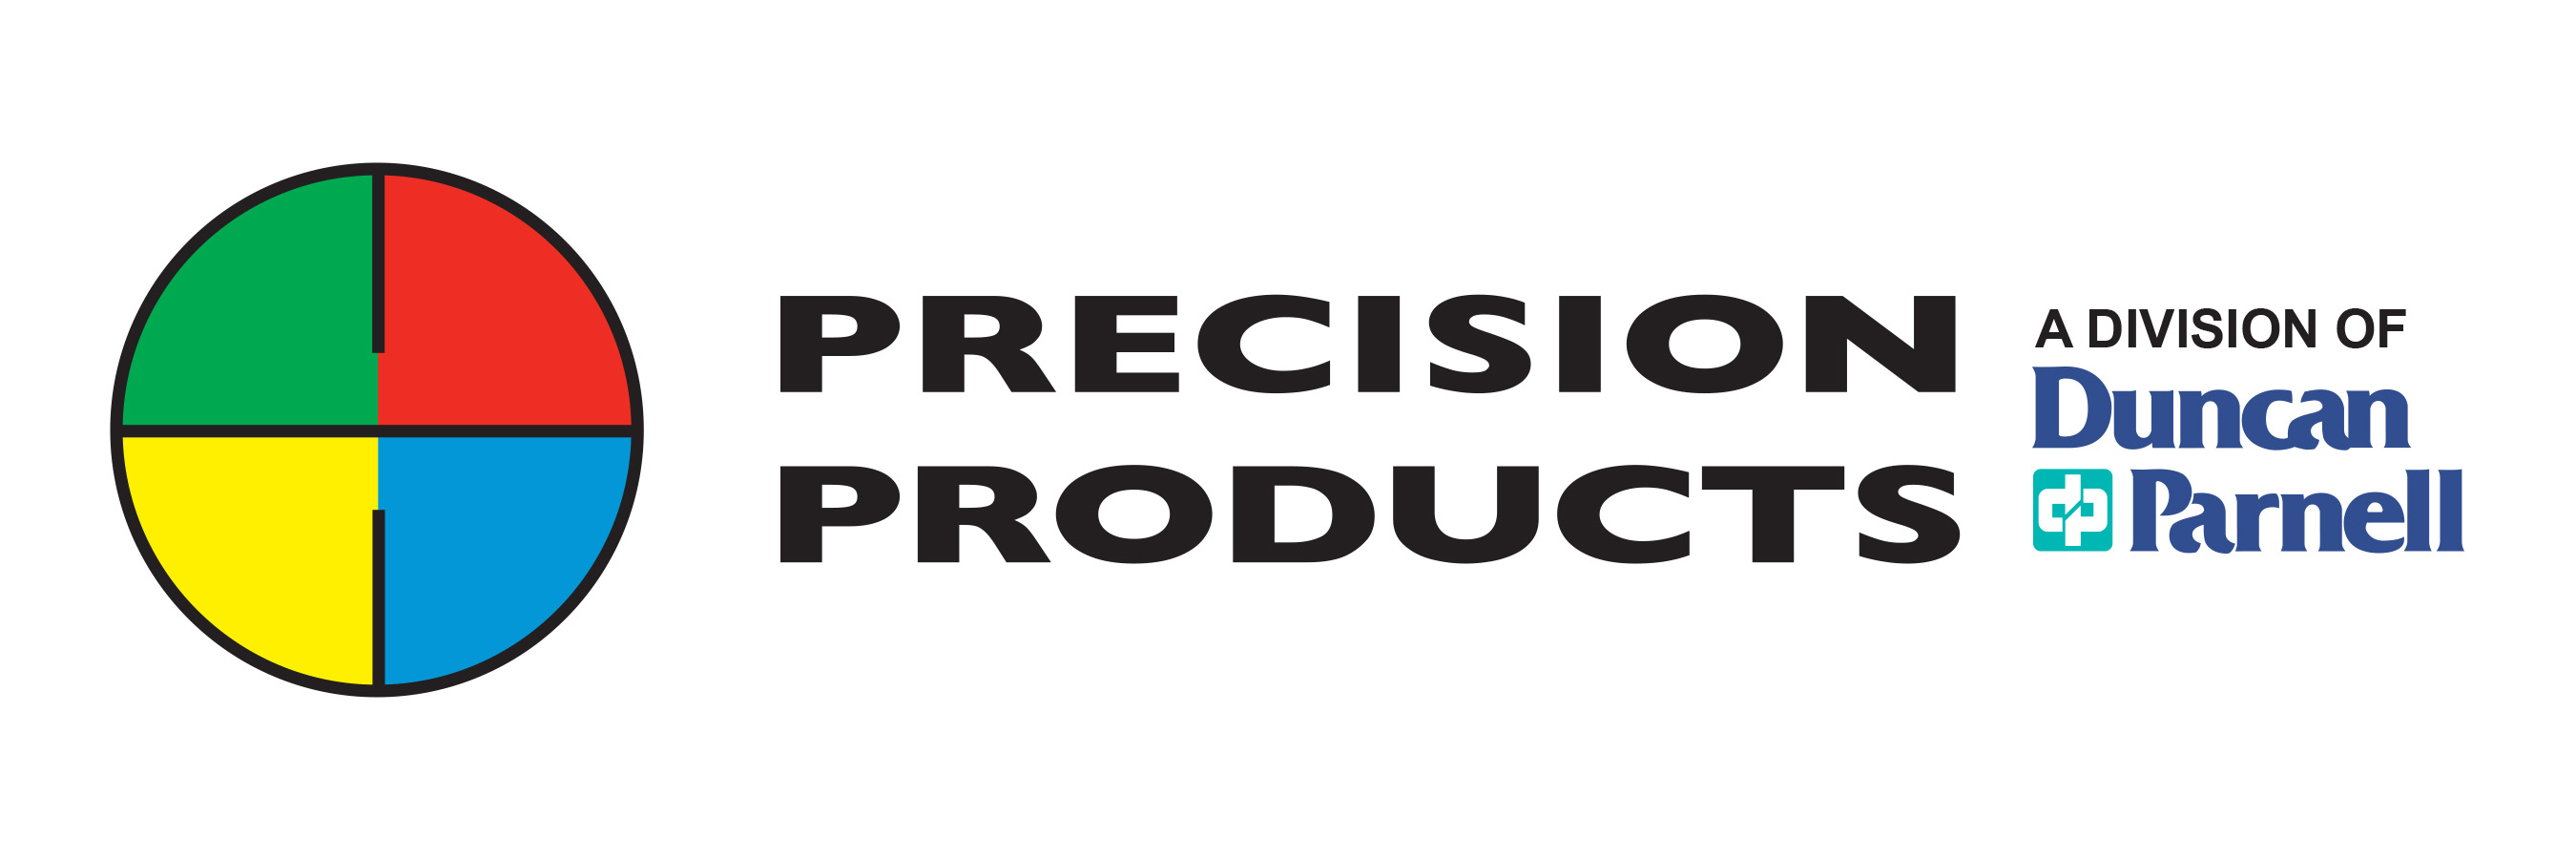 Duncan-Parnell Announces the Acquisition of Precision Products 